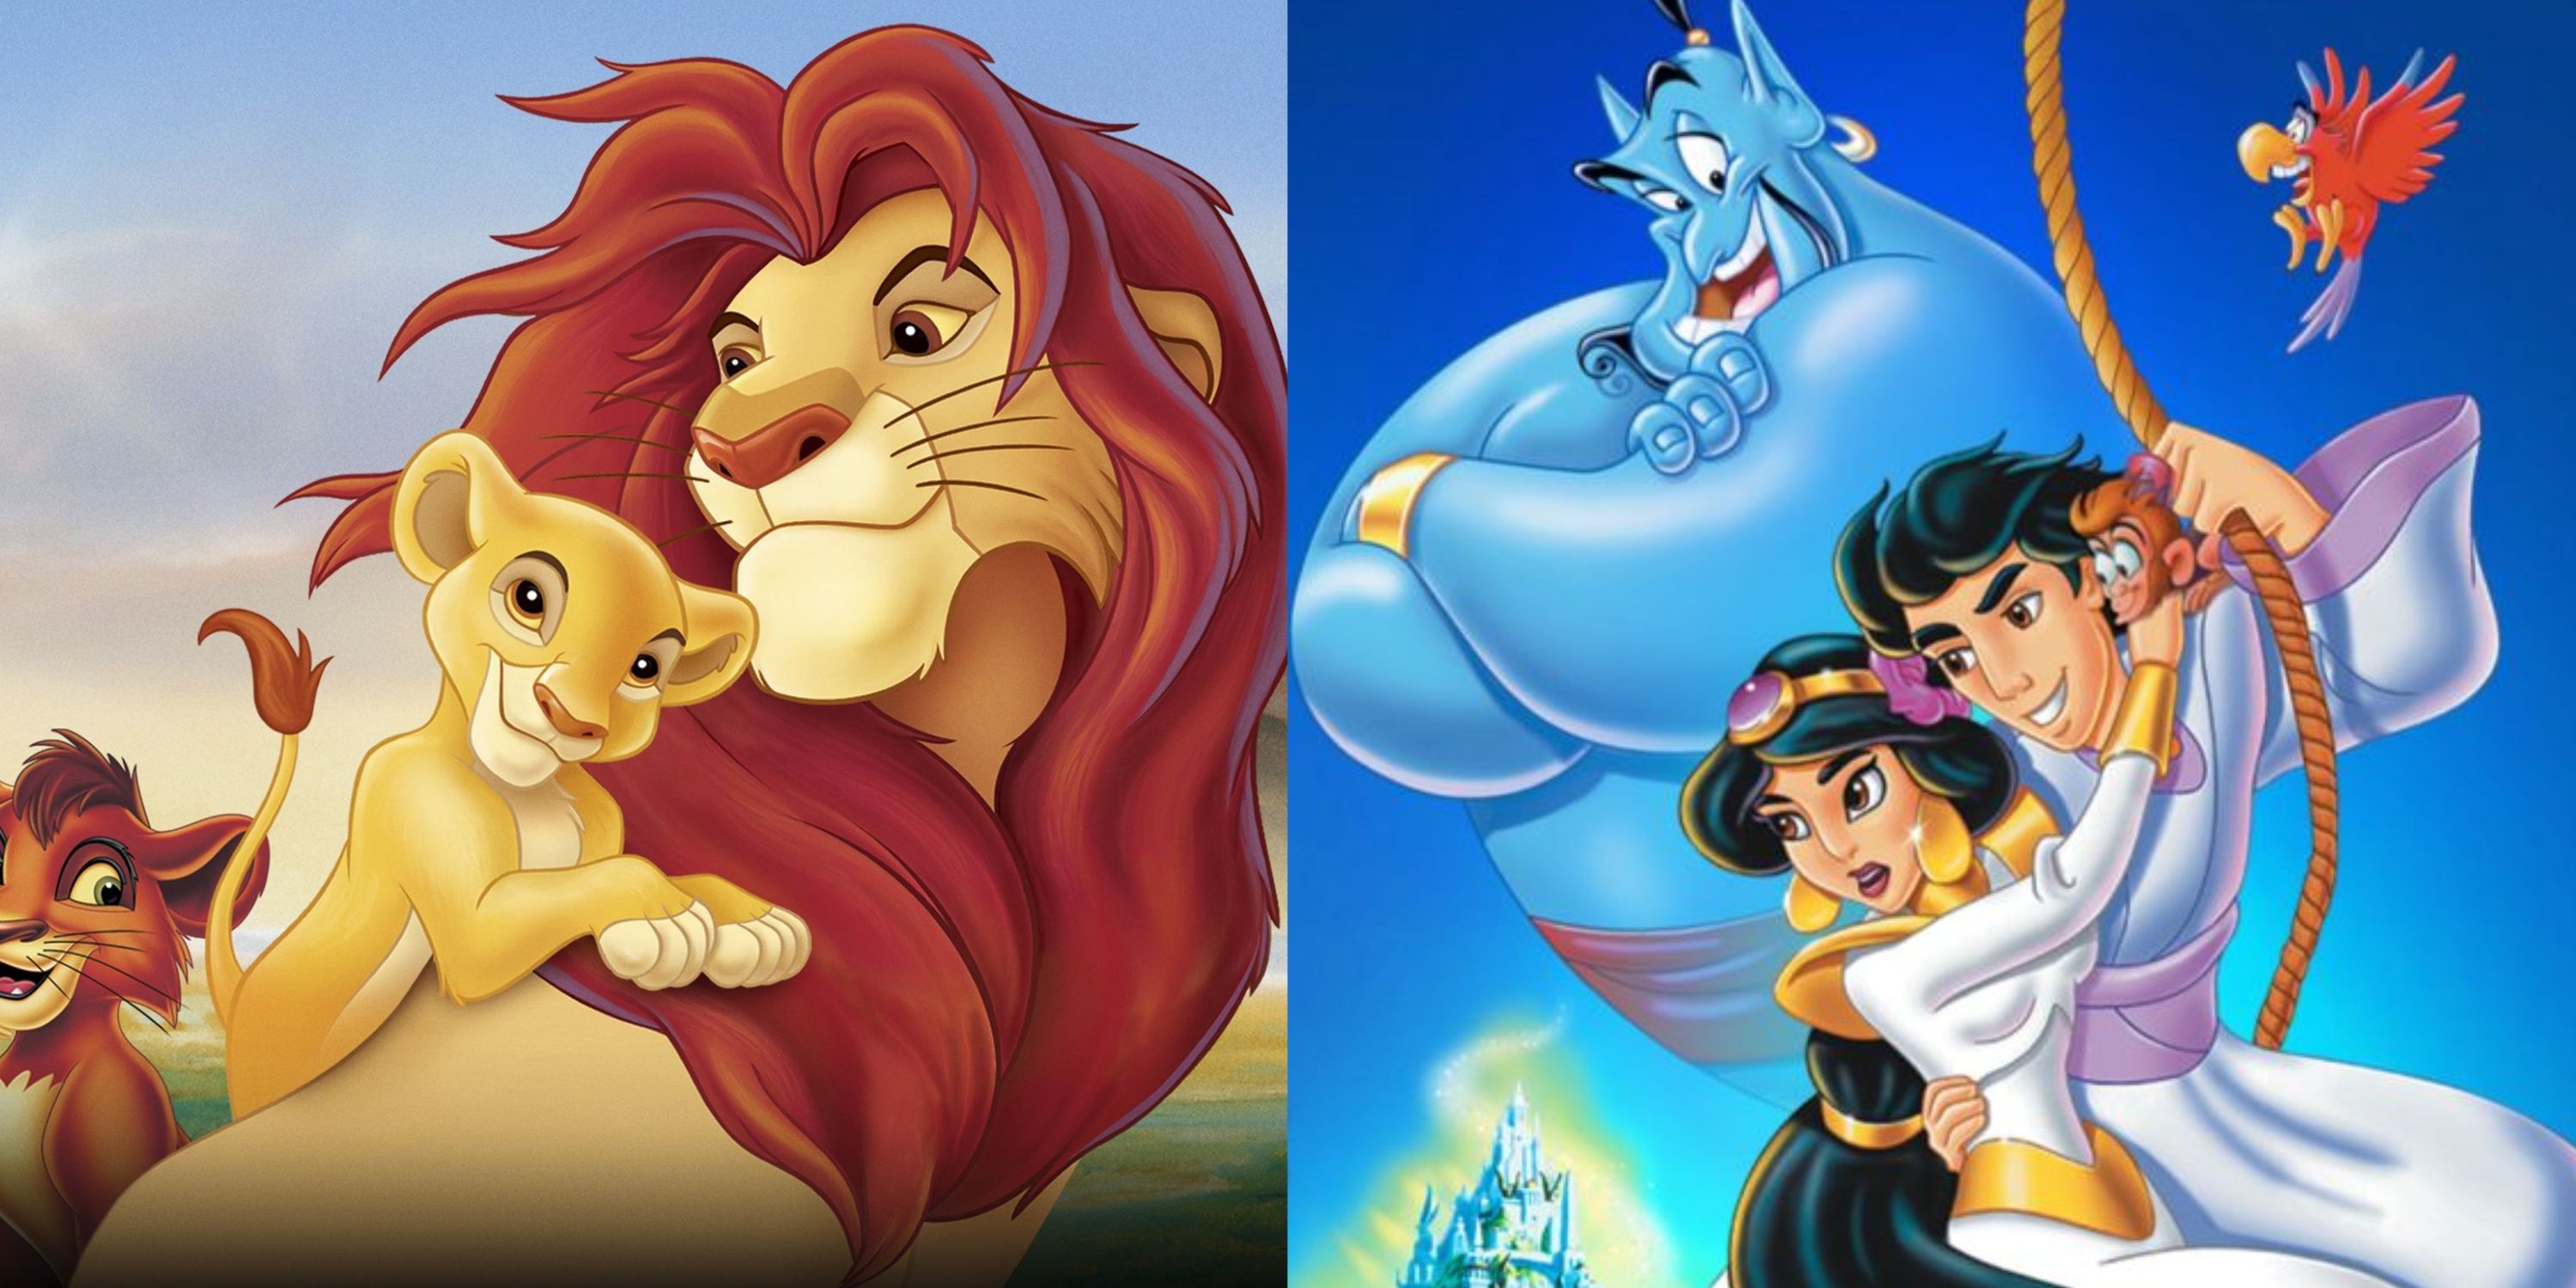 Split image of the Lion King and Aladdin sequels